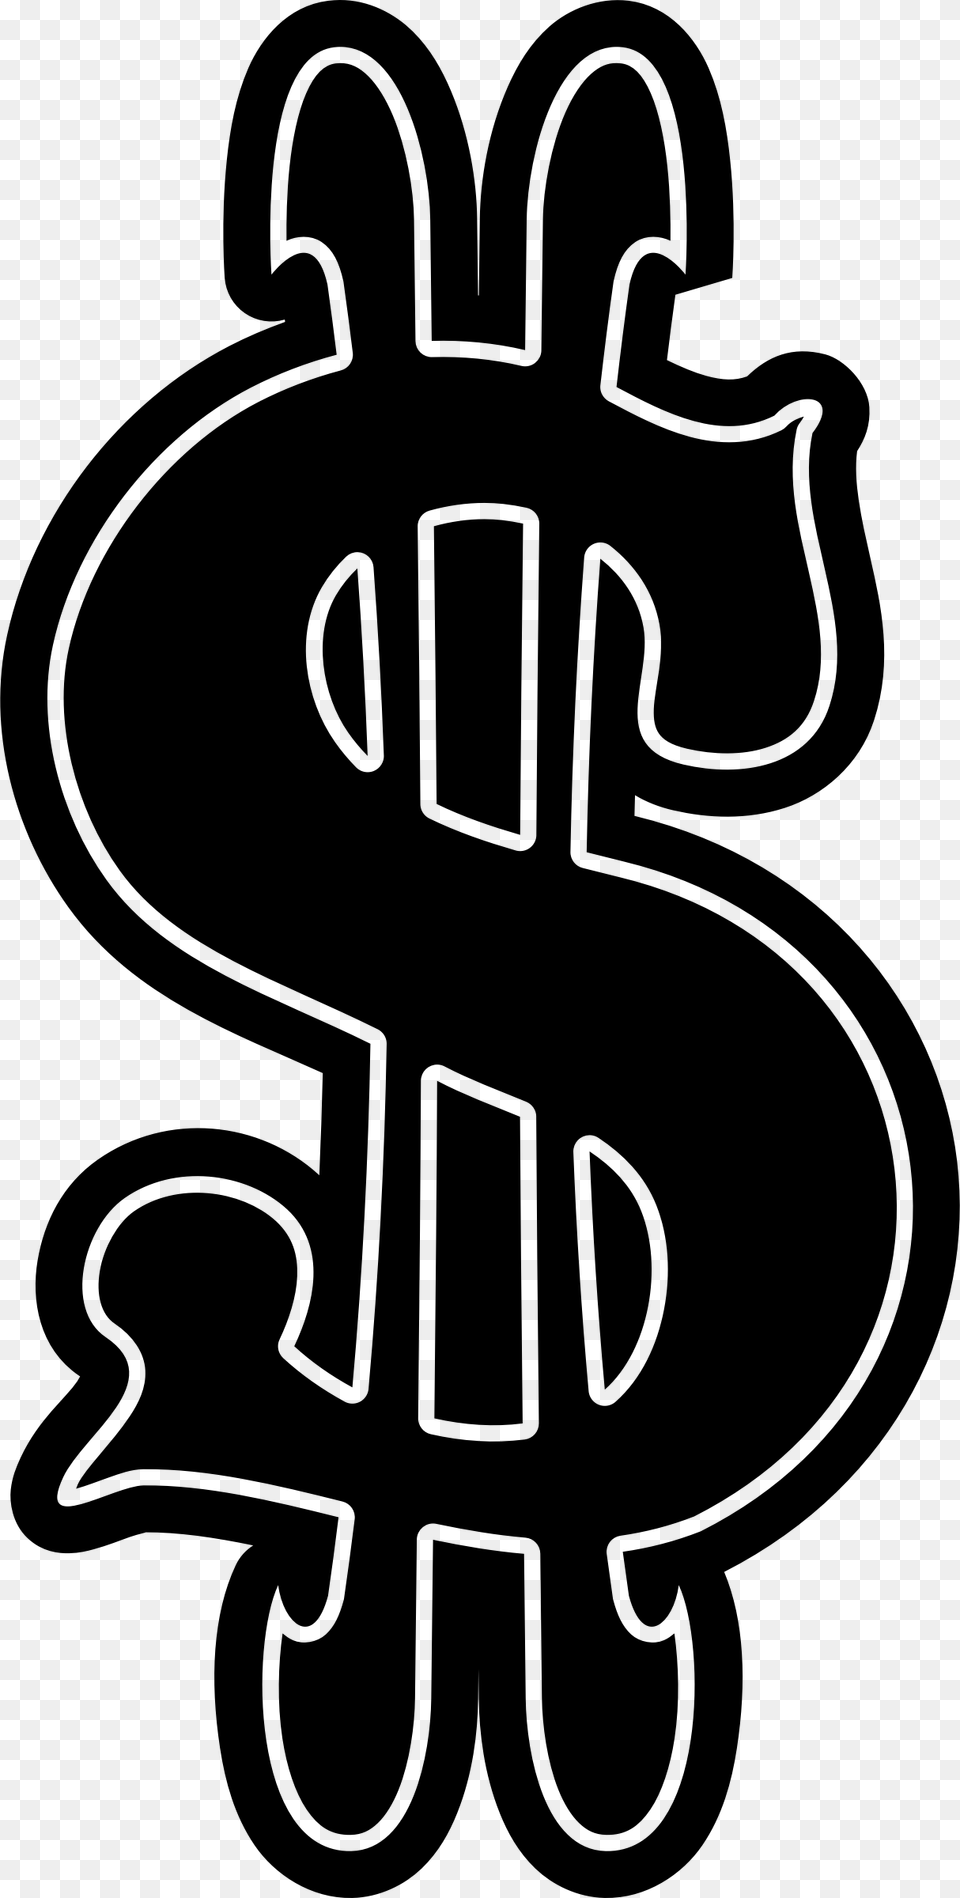 This Icons Design Of Black Amp White Dollar, Gray Png Image